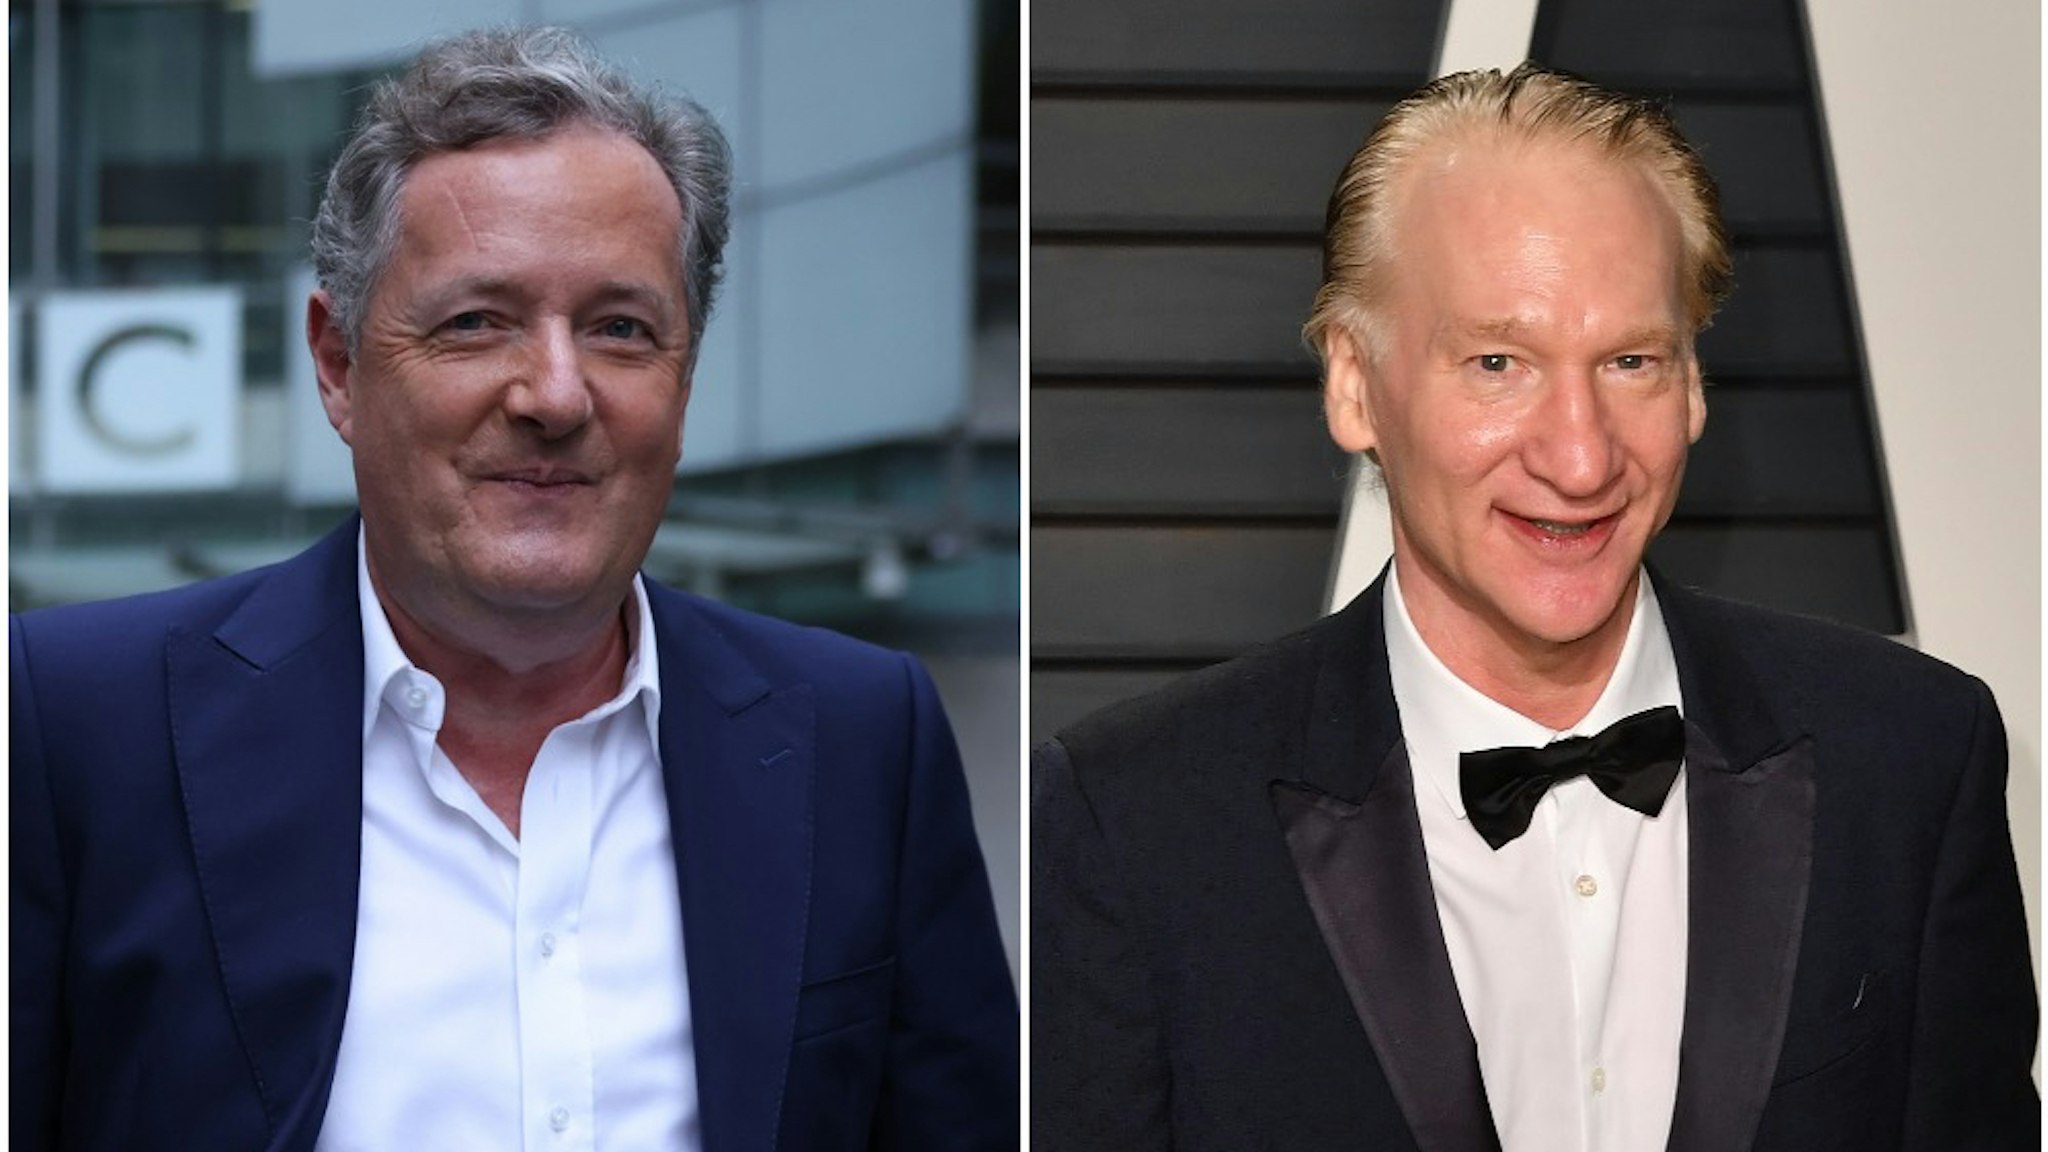 Piers Morgan takes his departure following his appearance on Sunday Morning at the BBC Broadcasting House on January 16, 2022 in London, England. Bill Maher attends the 2017 Vanity Fair Oscar Party hosted by Graydon Carter at Wallis Annenberg Center for the Performing Arts on February 26, 2017 in Beverly Hills, California.